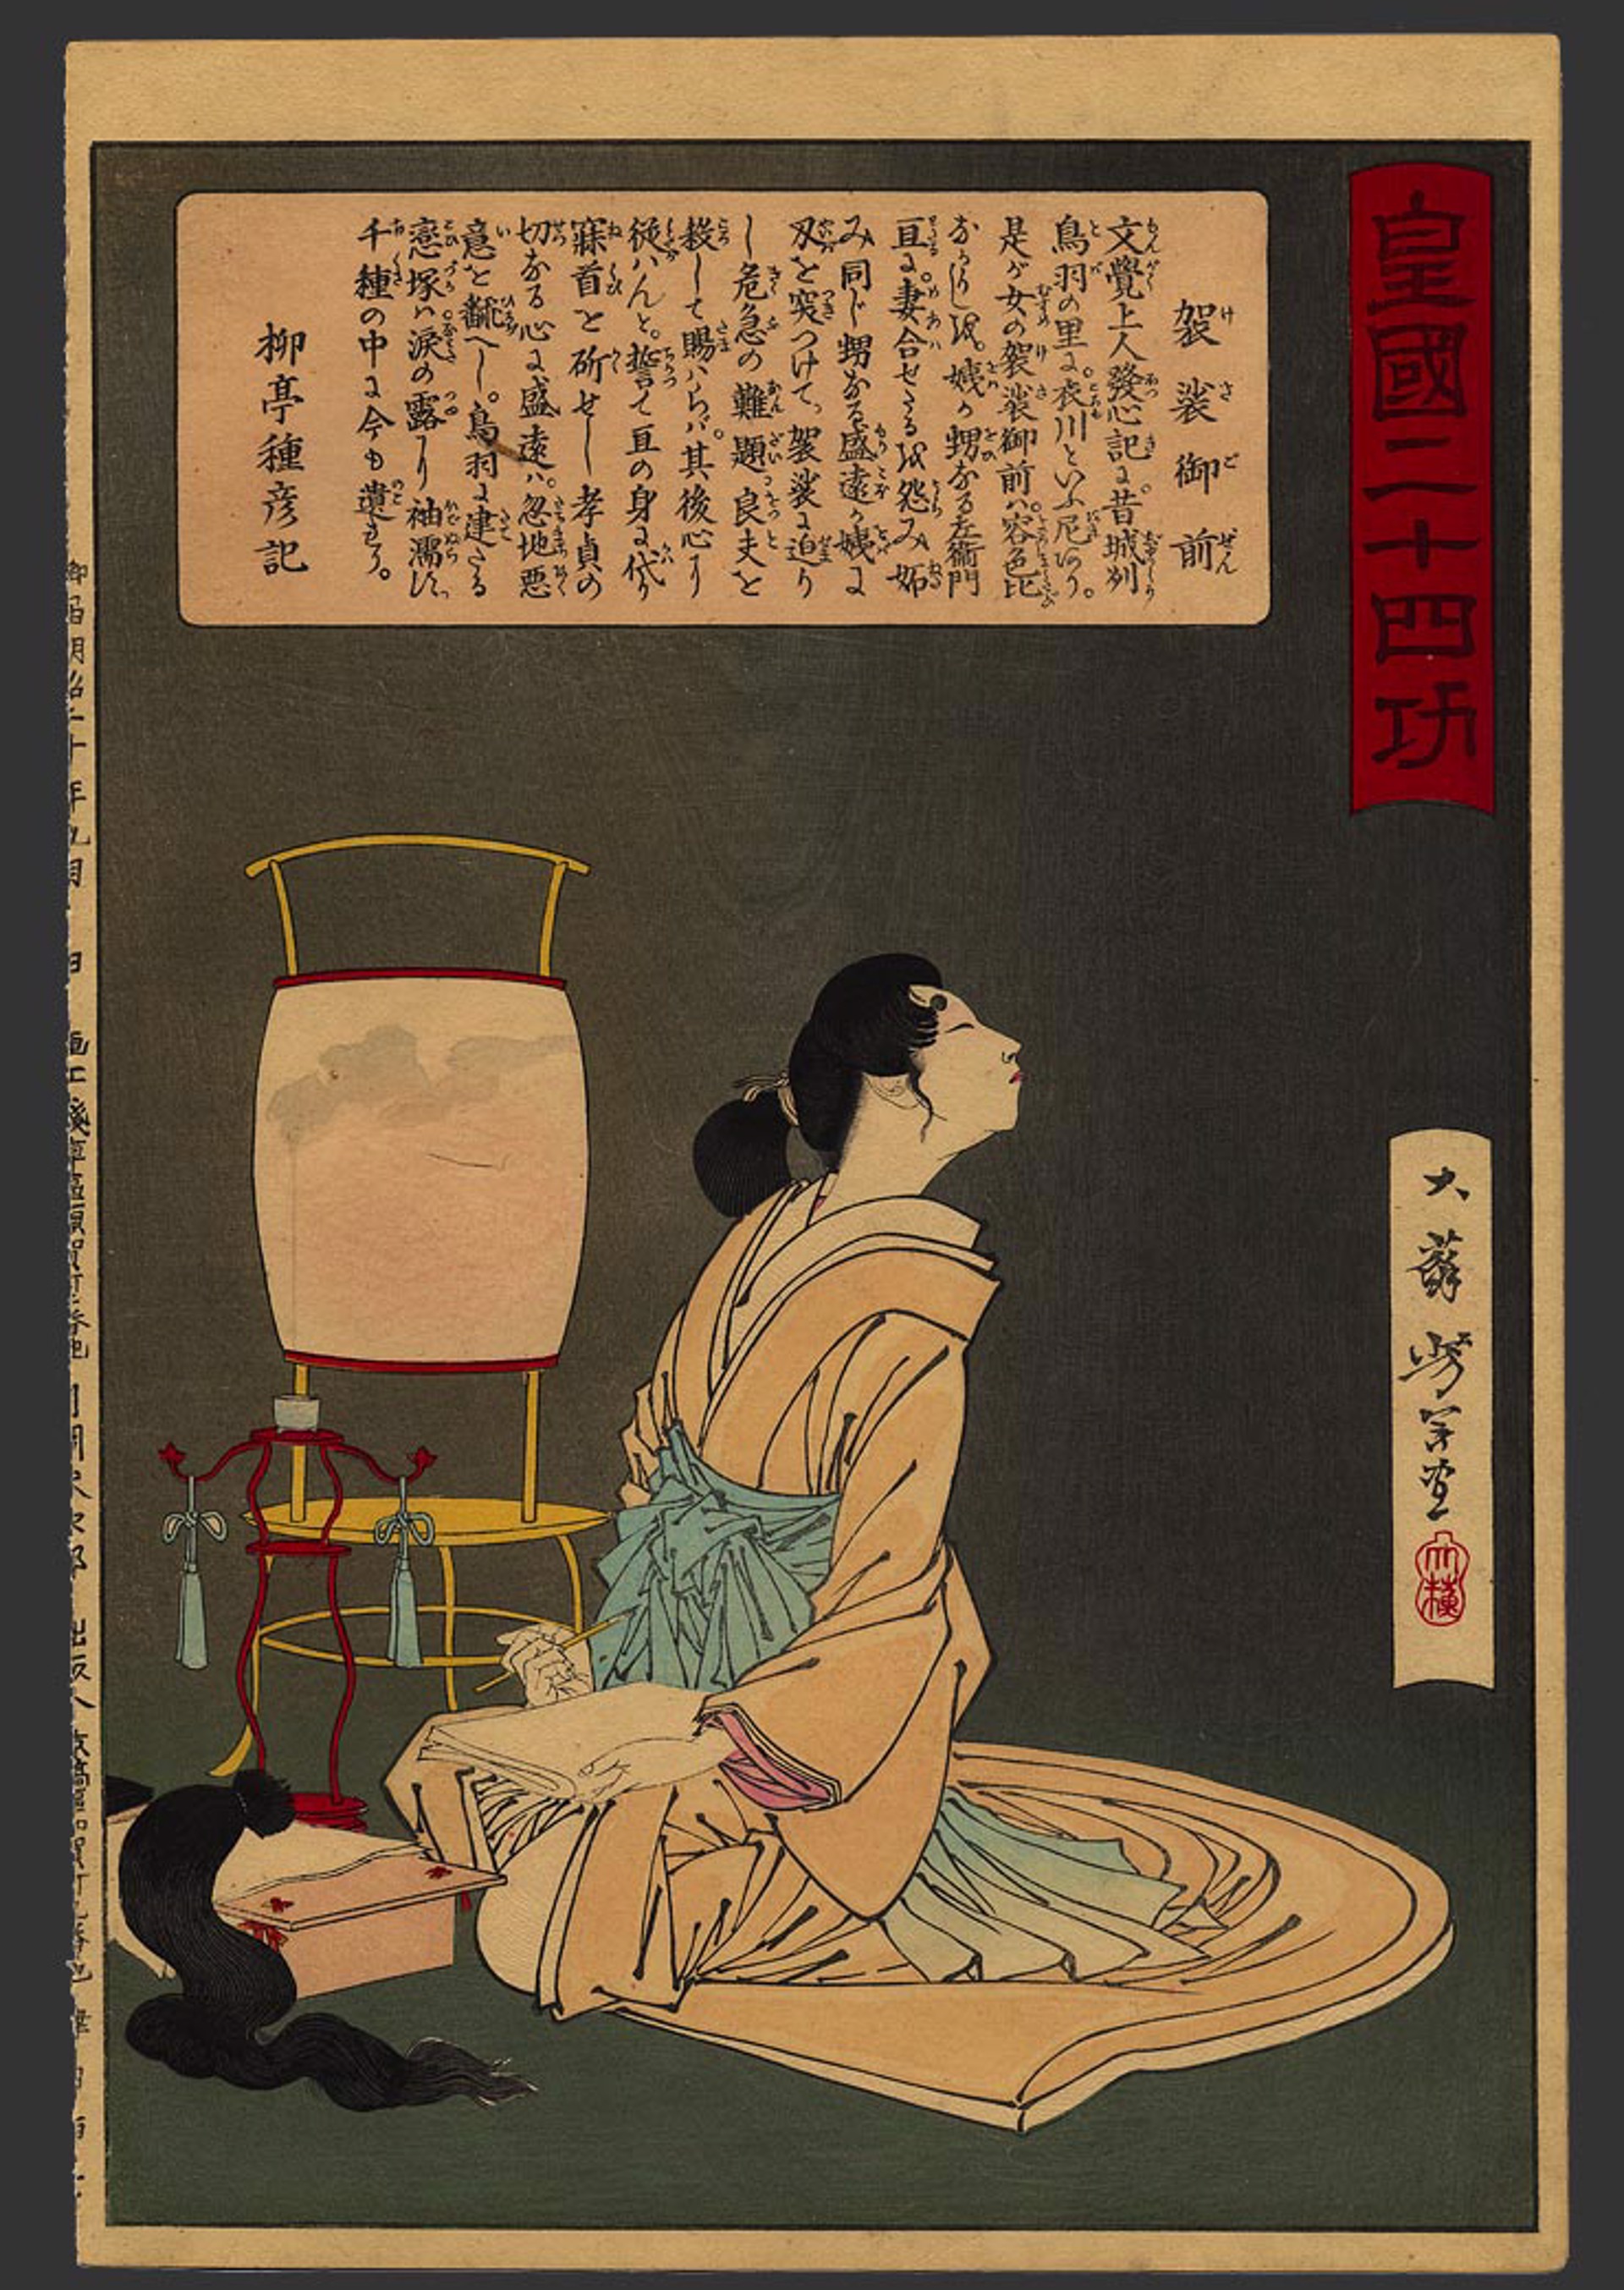 #21 Kesa Gozen writing her last words before dying for her husband. 24 Accomplishments in Imperial Japan by Yoshitoshi